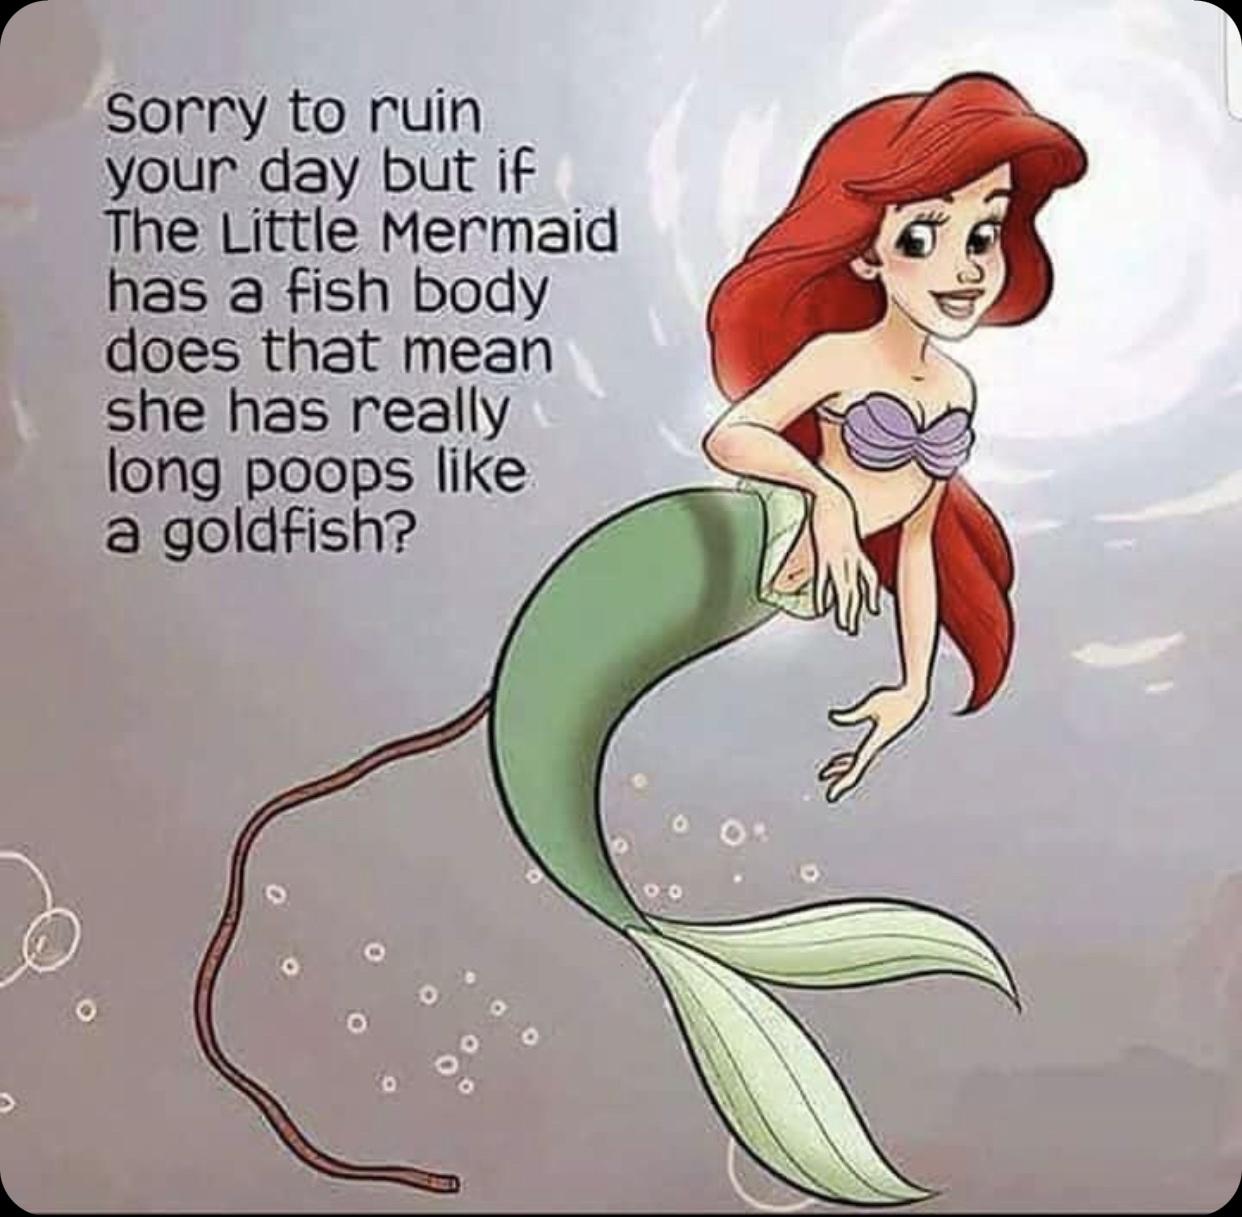 do mermaids poop - Sorry to ruin your day but if The Little Mermaid has a fish body does that mean she has really long poops a goldfish? Do